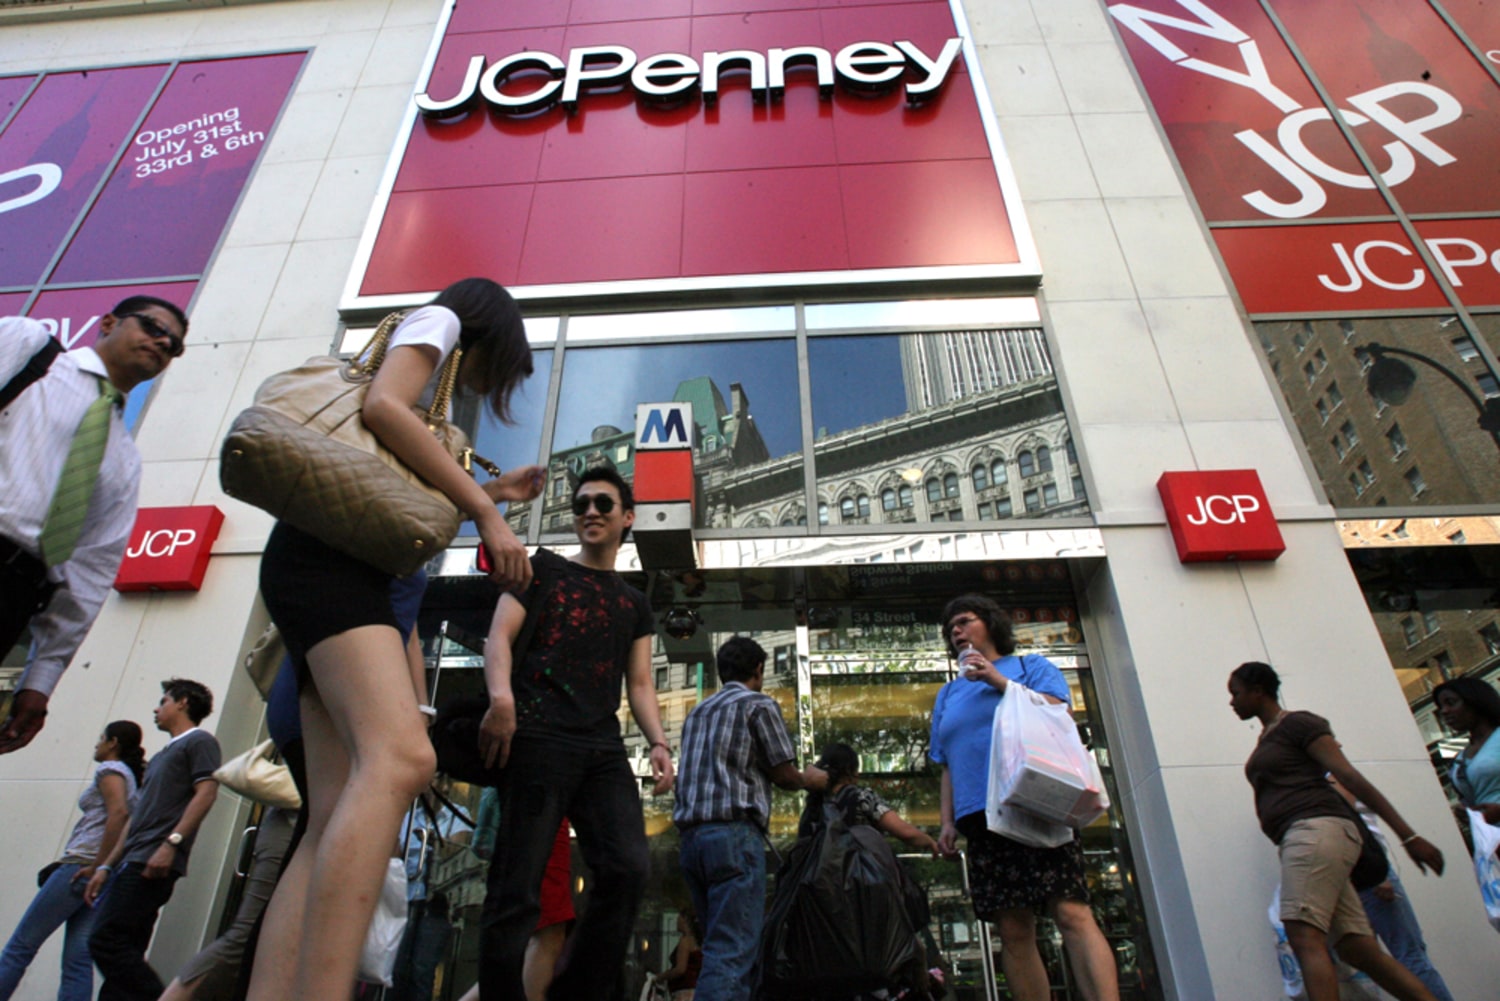 Sephora Cross Brands With JCPenney